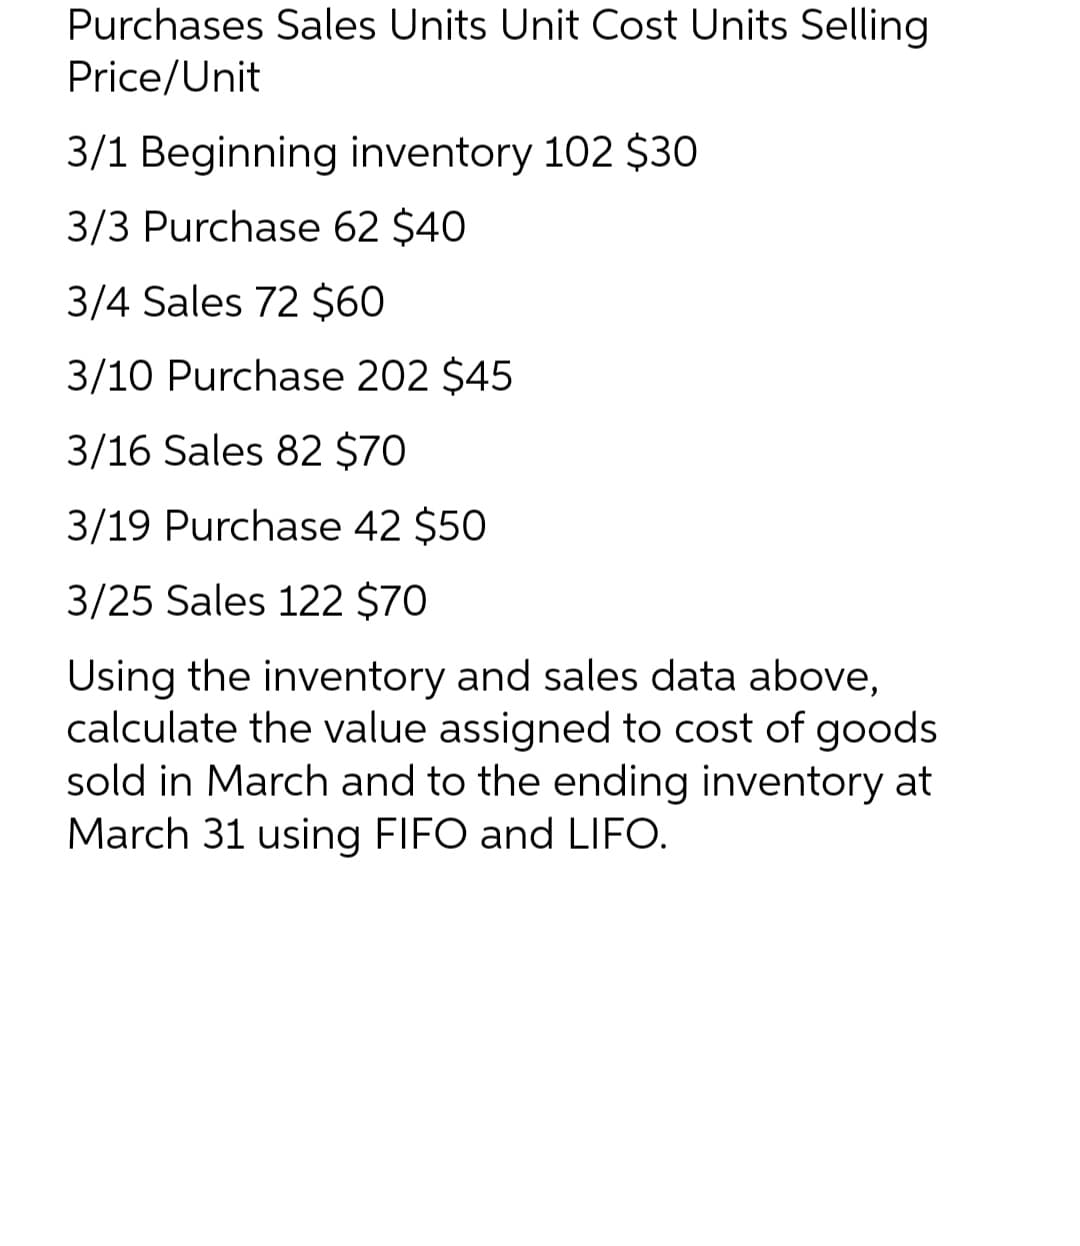 Purchases Sales Units Unit Cost Units Selling
Price/Unit
3/1 Beginning inventory 102 $30
3/3 Purchase 62 $40
3/4 Sales 72 $60
3/10 Purchase 202 $45
3/16 Sales 82 $70
3/19 Purchase 42 $50
3/25 Sales 122 $70
Using the inventory and sales data above,
calculate the value assigned to cost of goods
sold in March and to the ending inventory at
March 31 using FIFO and LIFO.